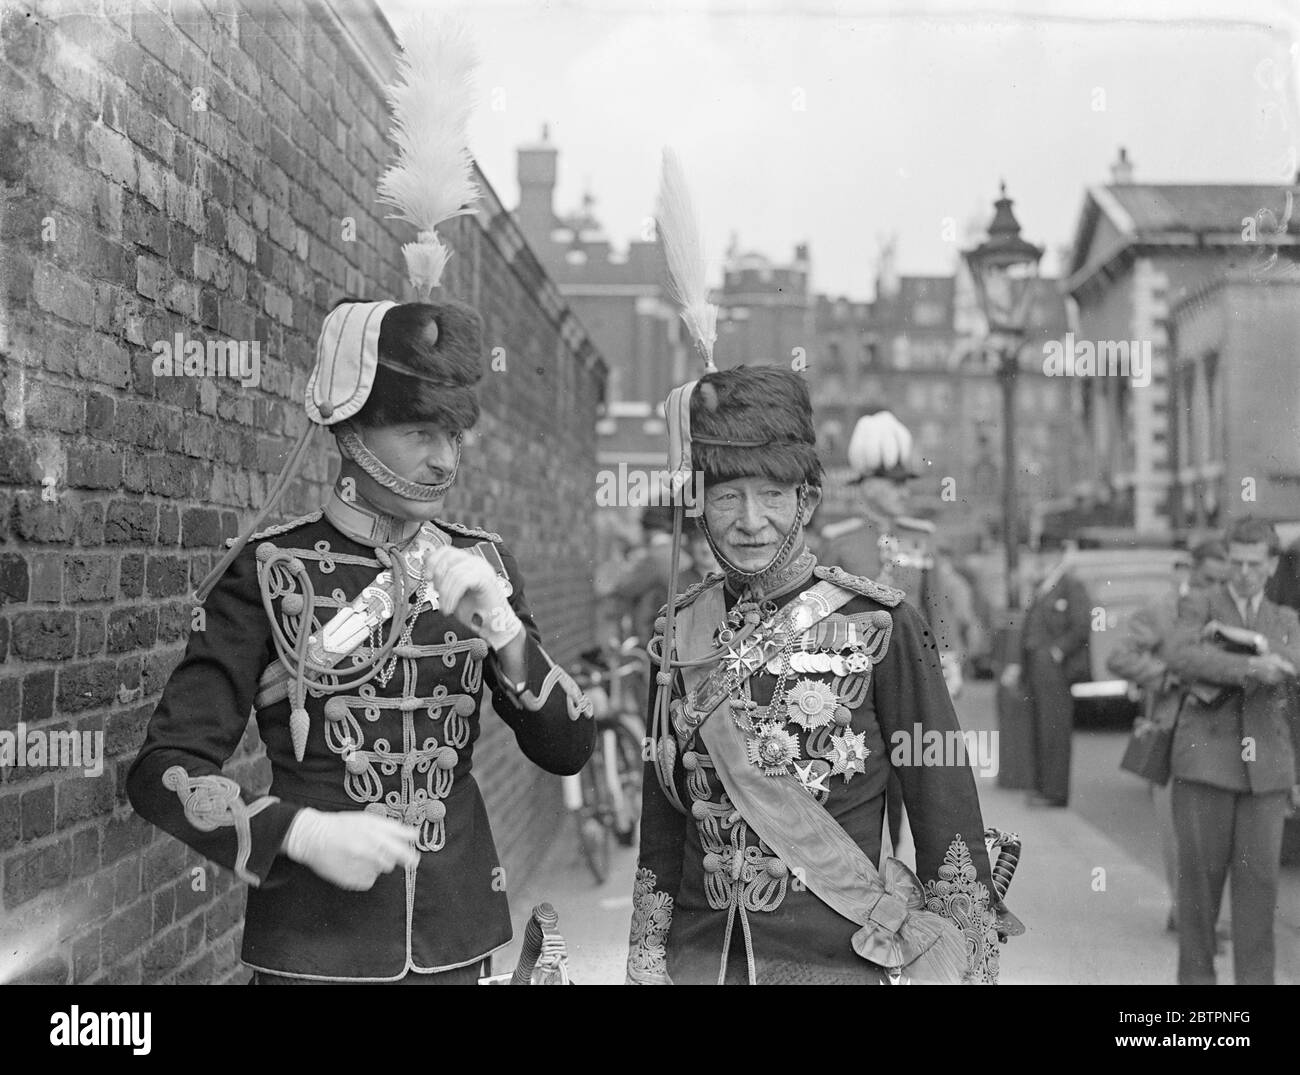 Lord Baden Powell at Levee. Lord Baden Powell, the Chief Scout, attended the levee held by the King at St James's Palace. Photo show, Lord Baden Powell leaving with Colonel Sidney Kennedy after attending the levee. 22 June 1937 Stock Photo